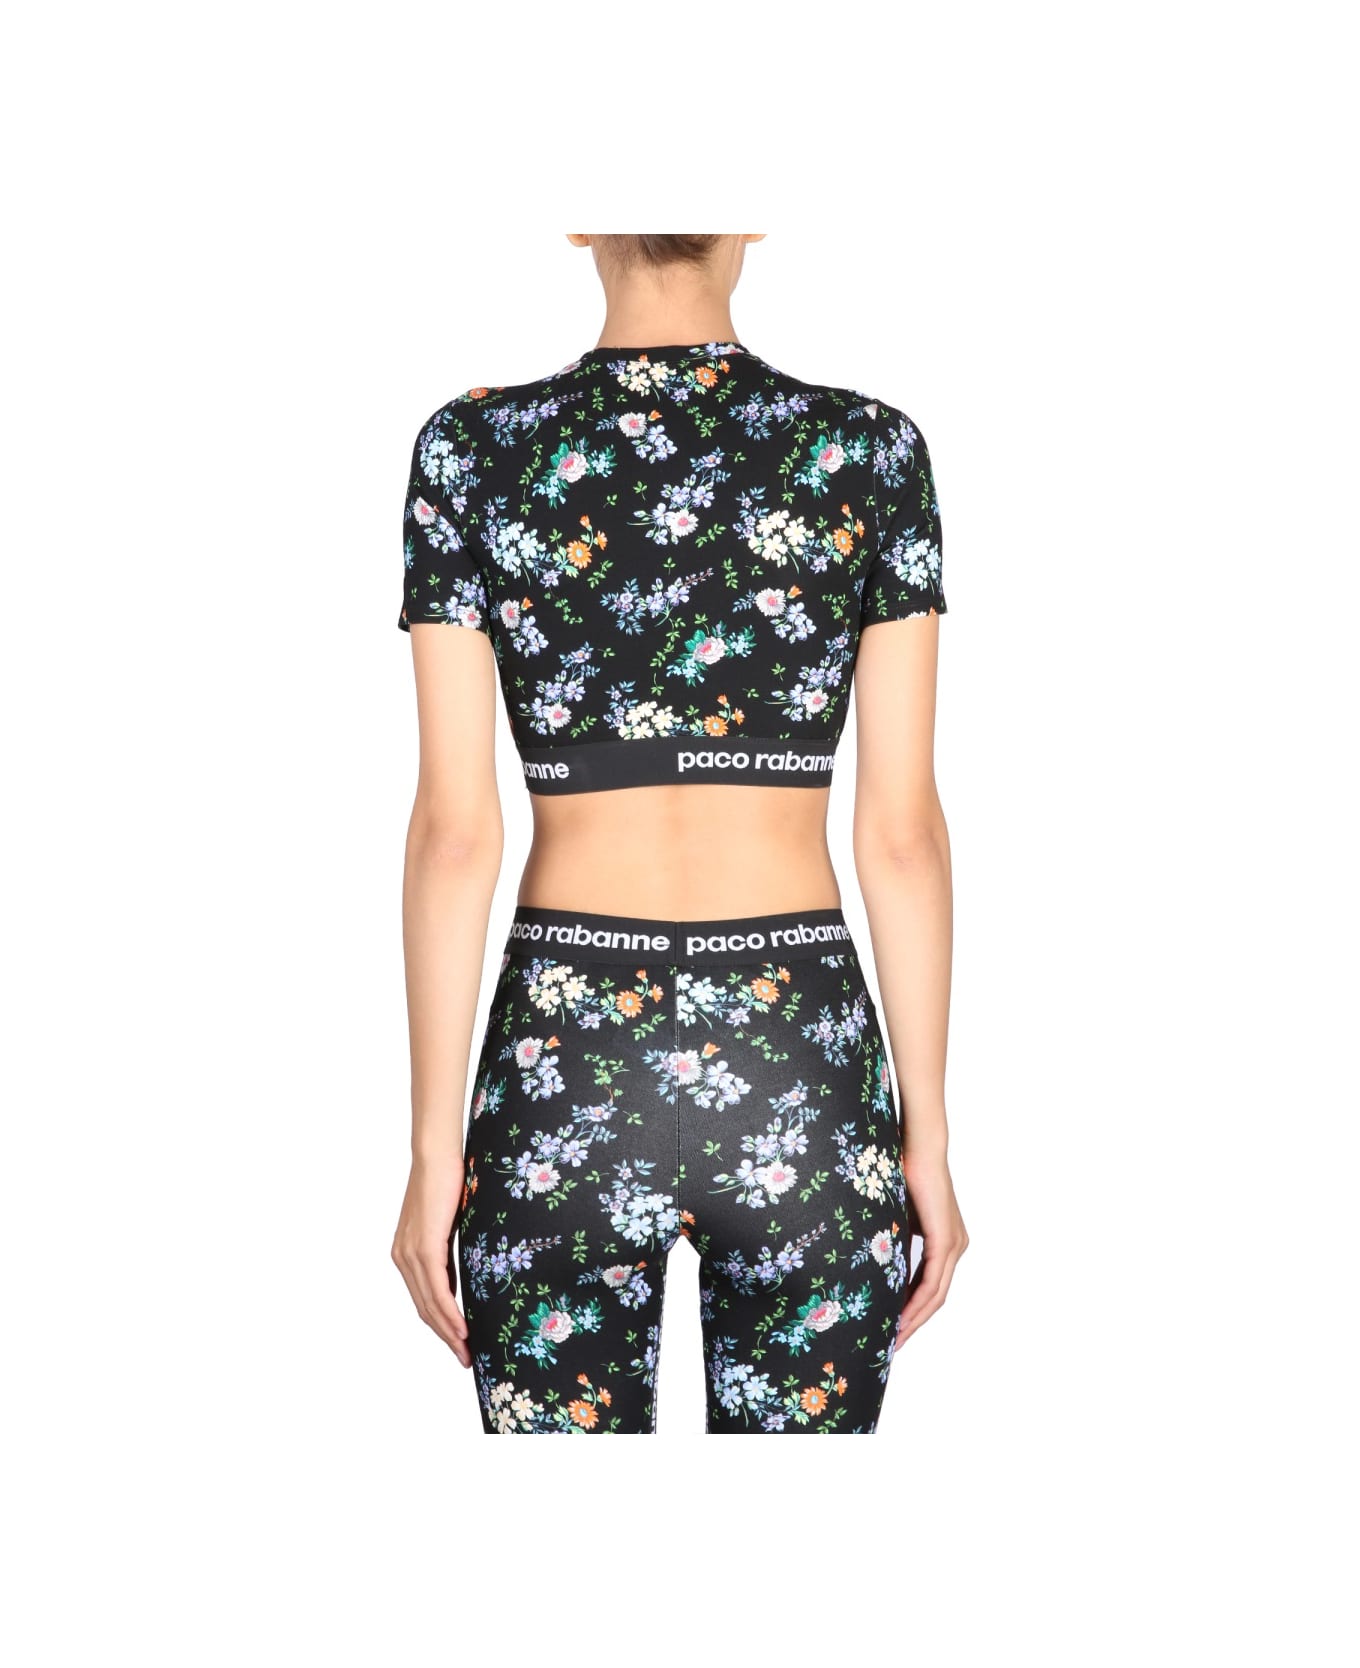 Paco Rabanne Top Cropped - MULTICOLOUR